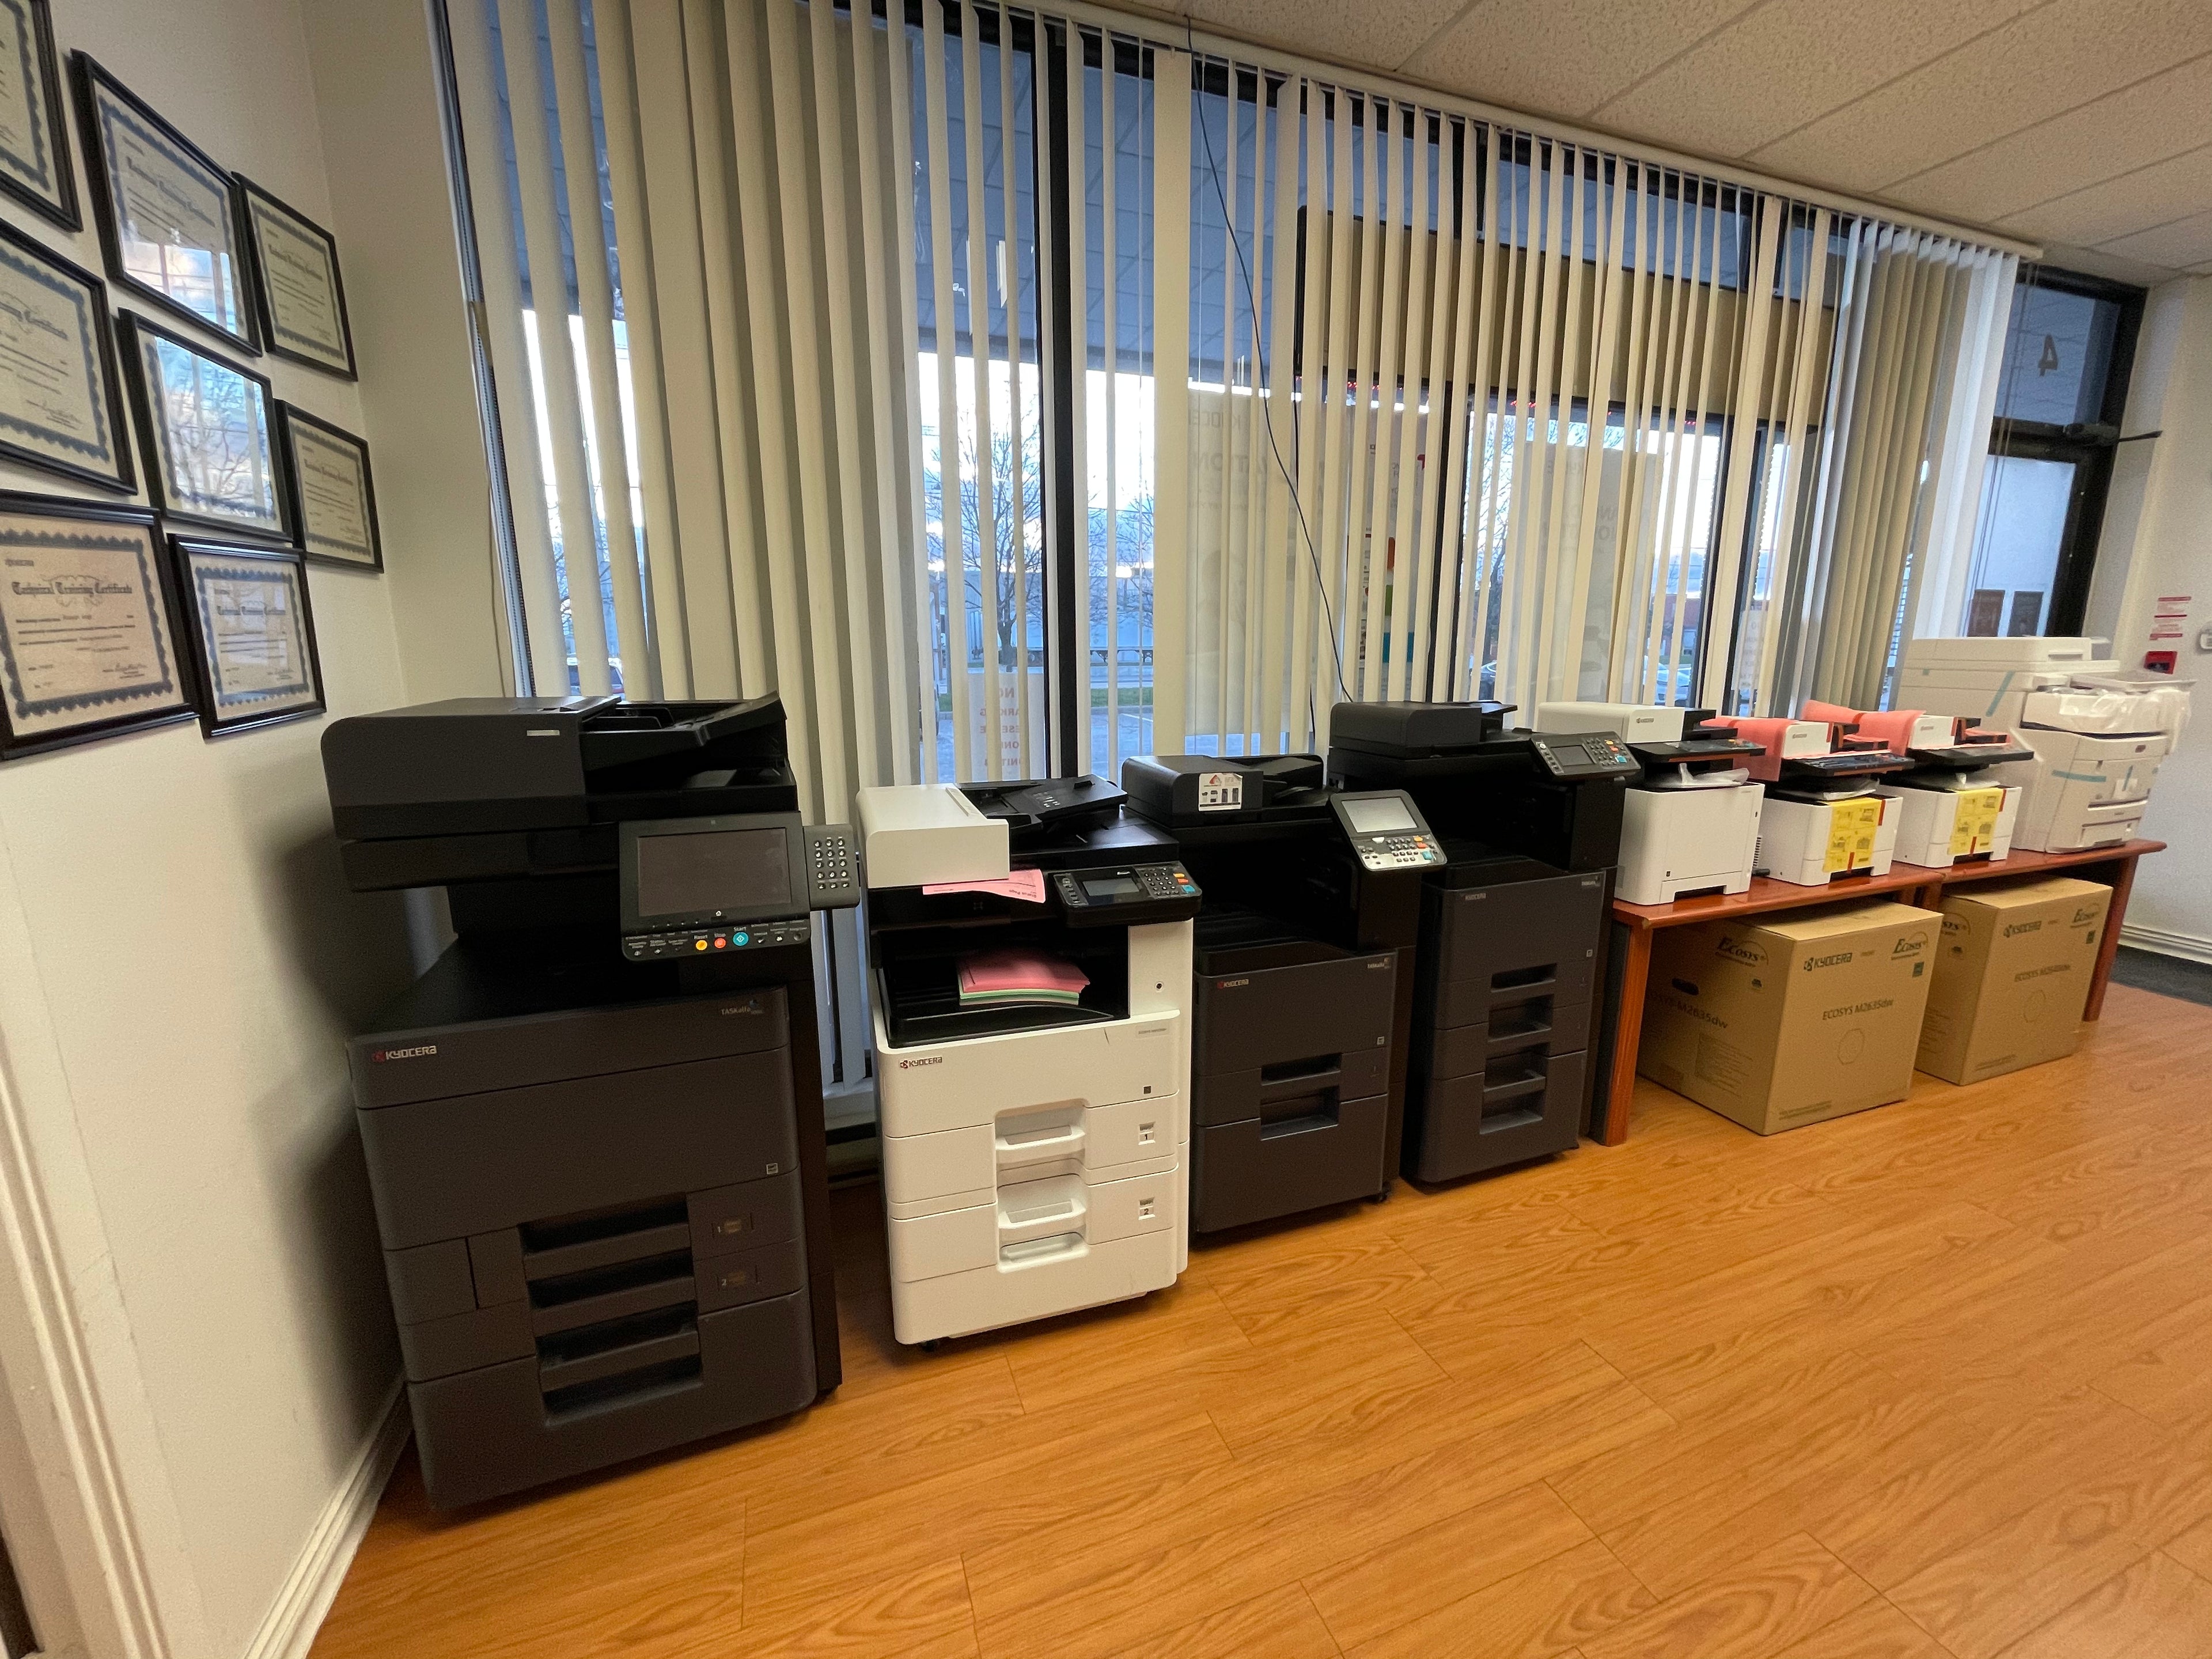 Just Right Office Photocopier Rentals, Office Printers For Rent, Printer Rentals in Mississauga, Toronto & Greater Toronto Area